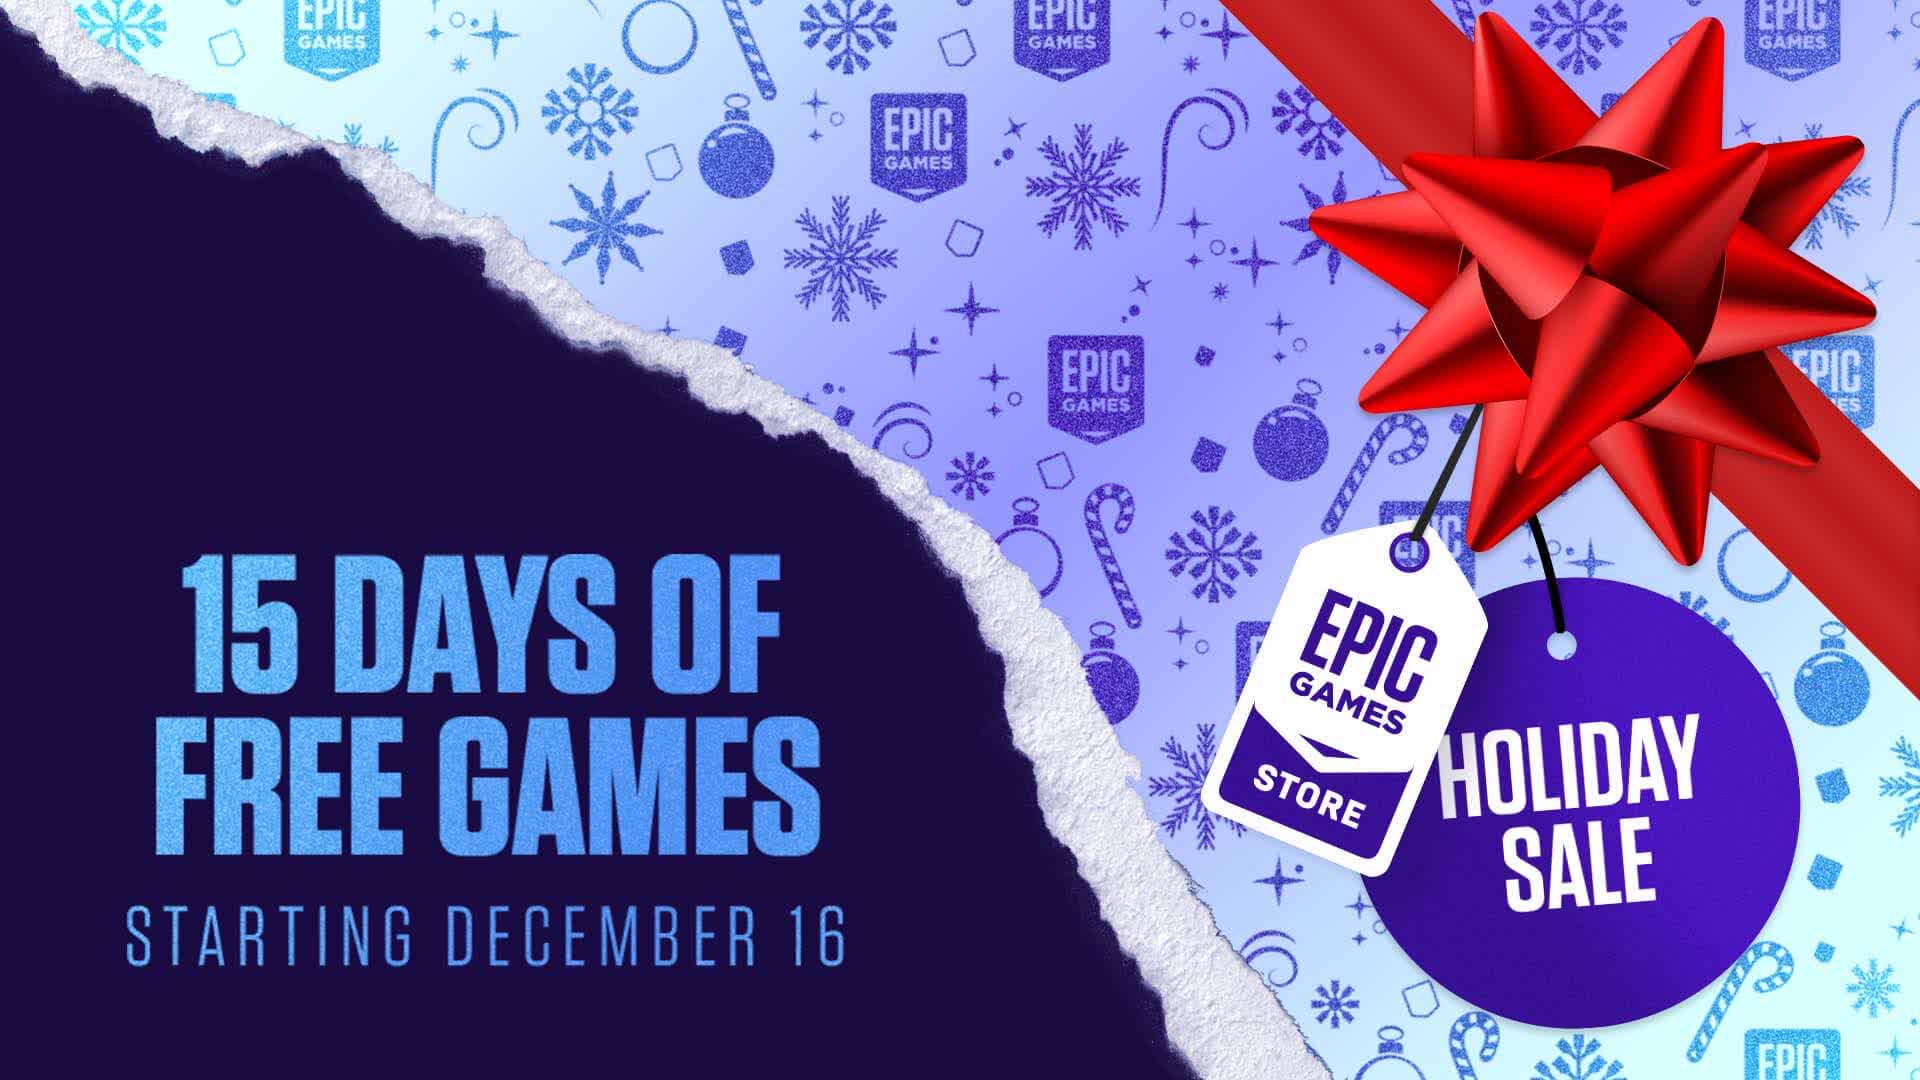 The Epic Games Store holiday sale is live, and they're giving away 15 free games